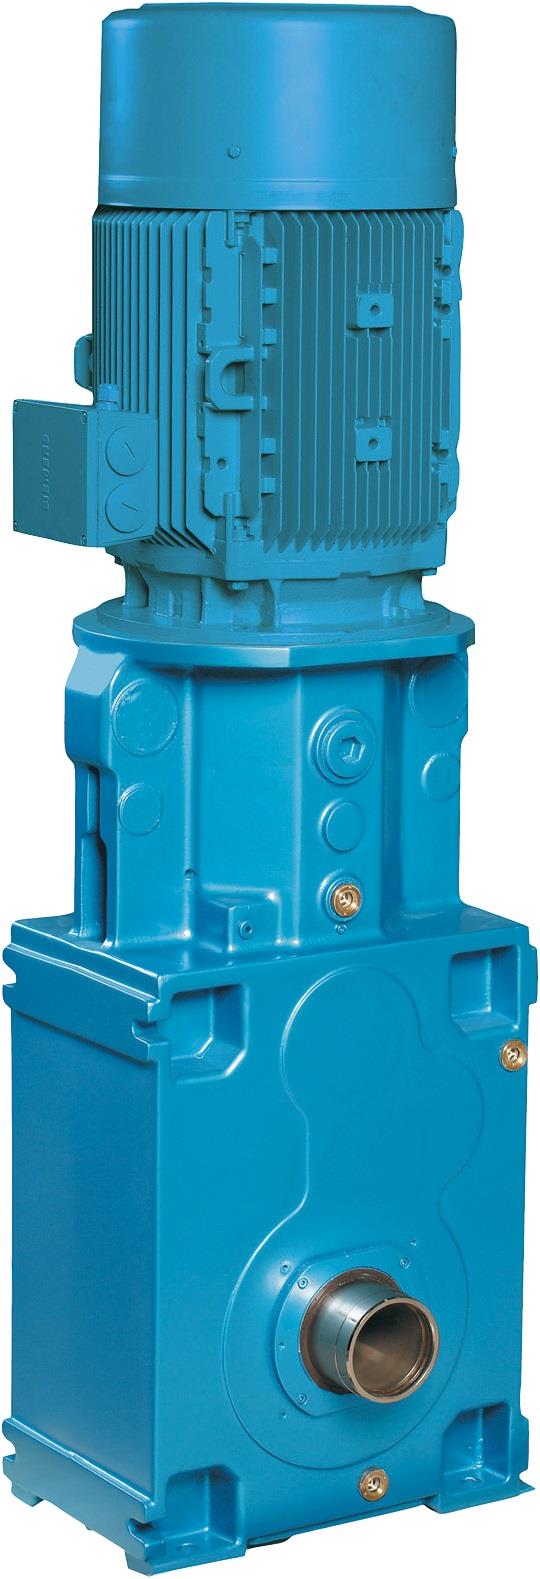 Long Travel Drives Gearbox , Trolley travelling Gearbox , Cable Reel Gearbox,Long Travel Drives Gearbox, Cables Reel  Gearbox , Trolley travelling Gearbox,Dana Brevini , PIV DRIVE GMBH,Machinery and Process Equipment/Gears/Gearboxes